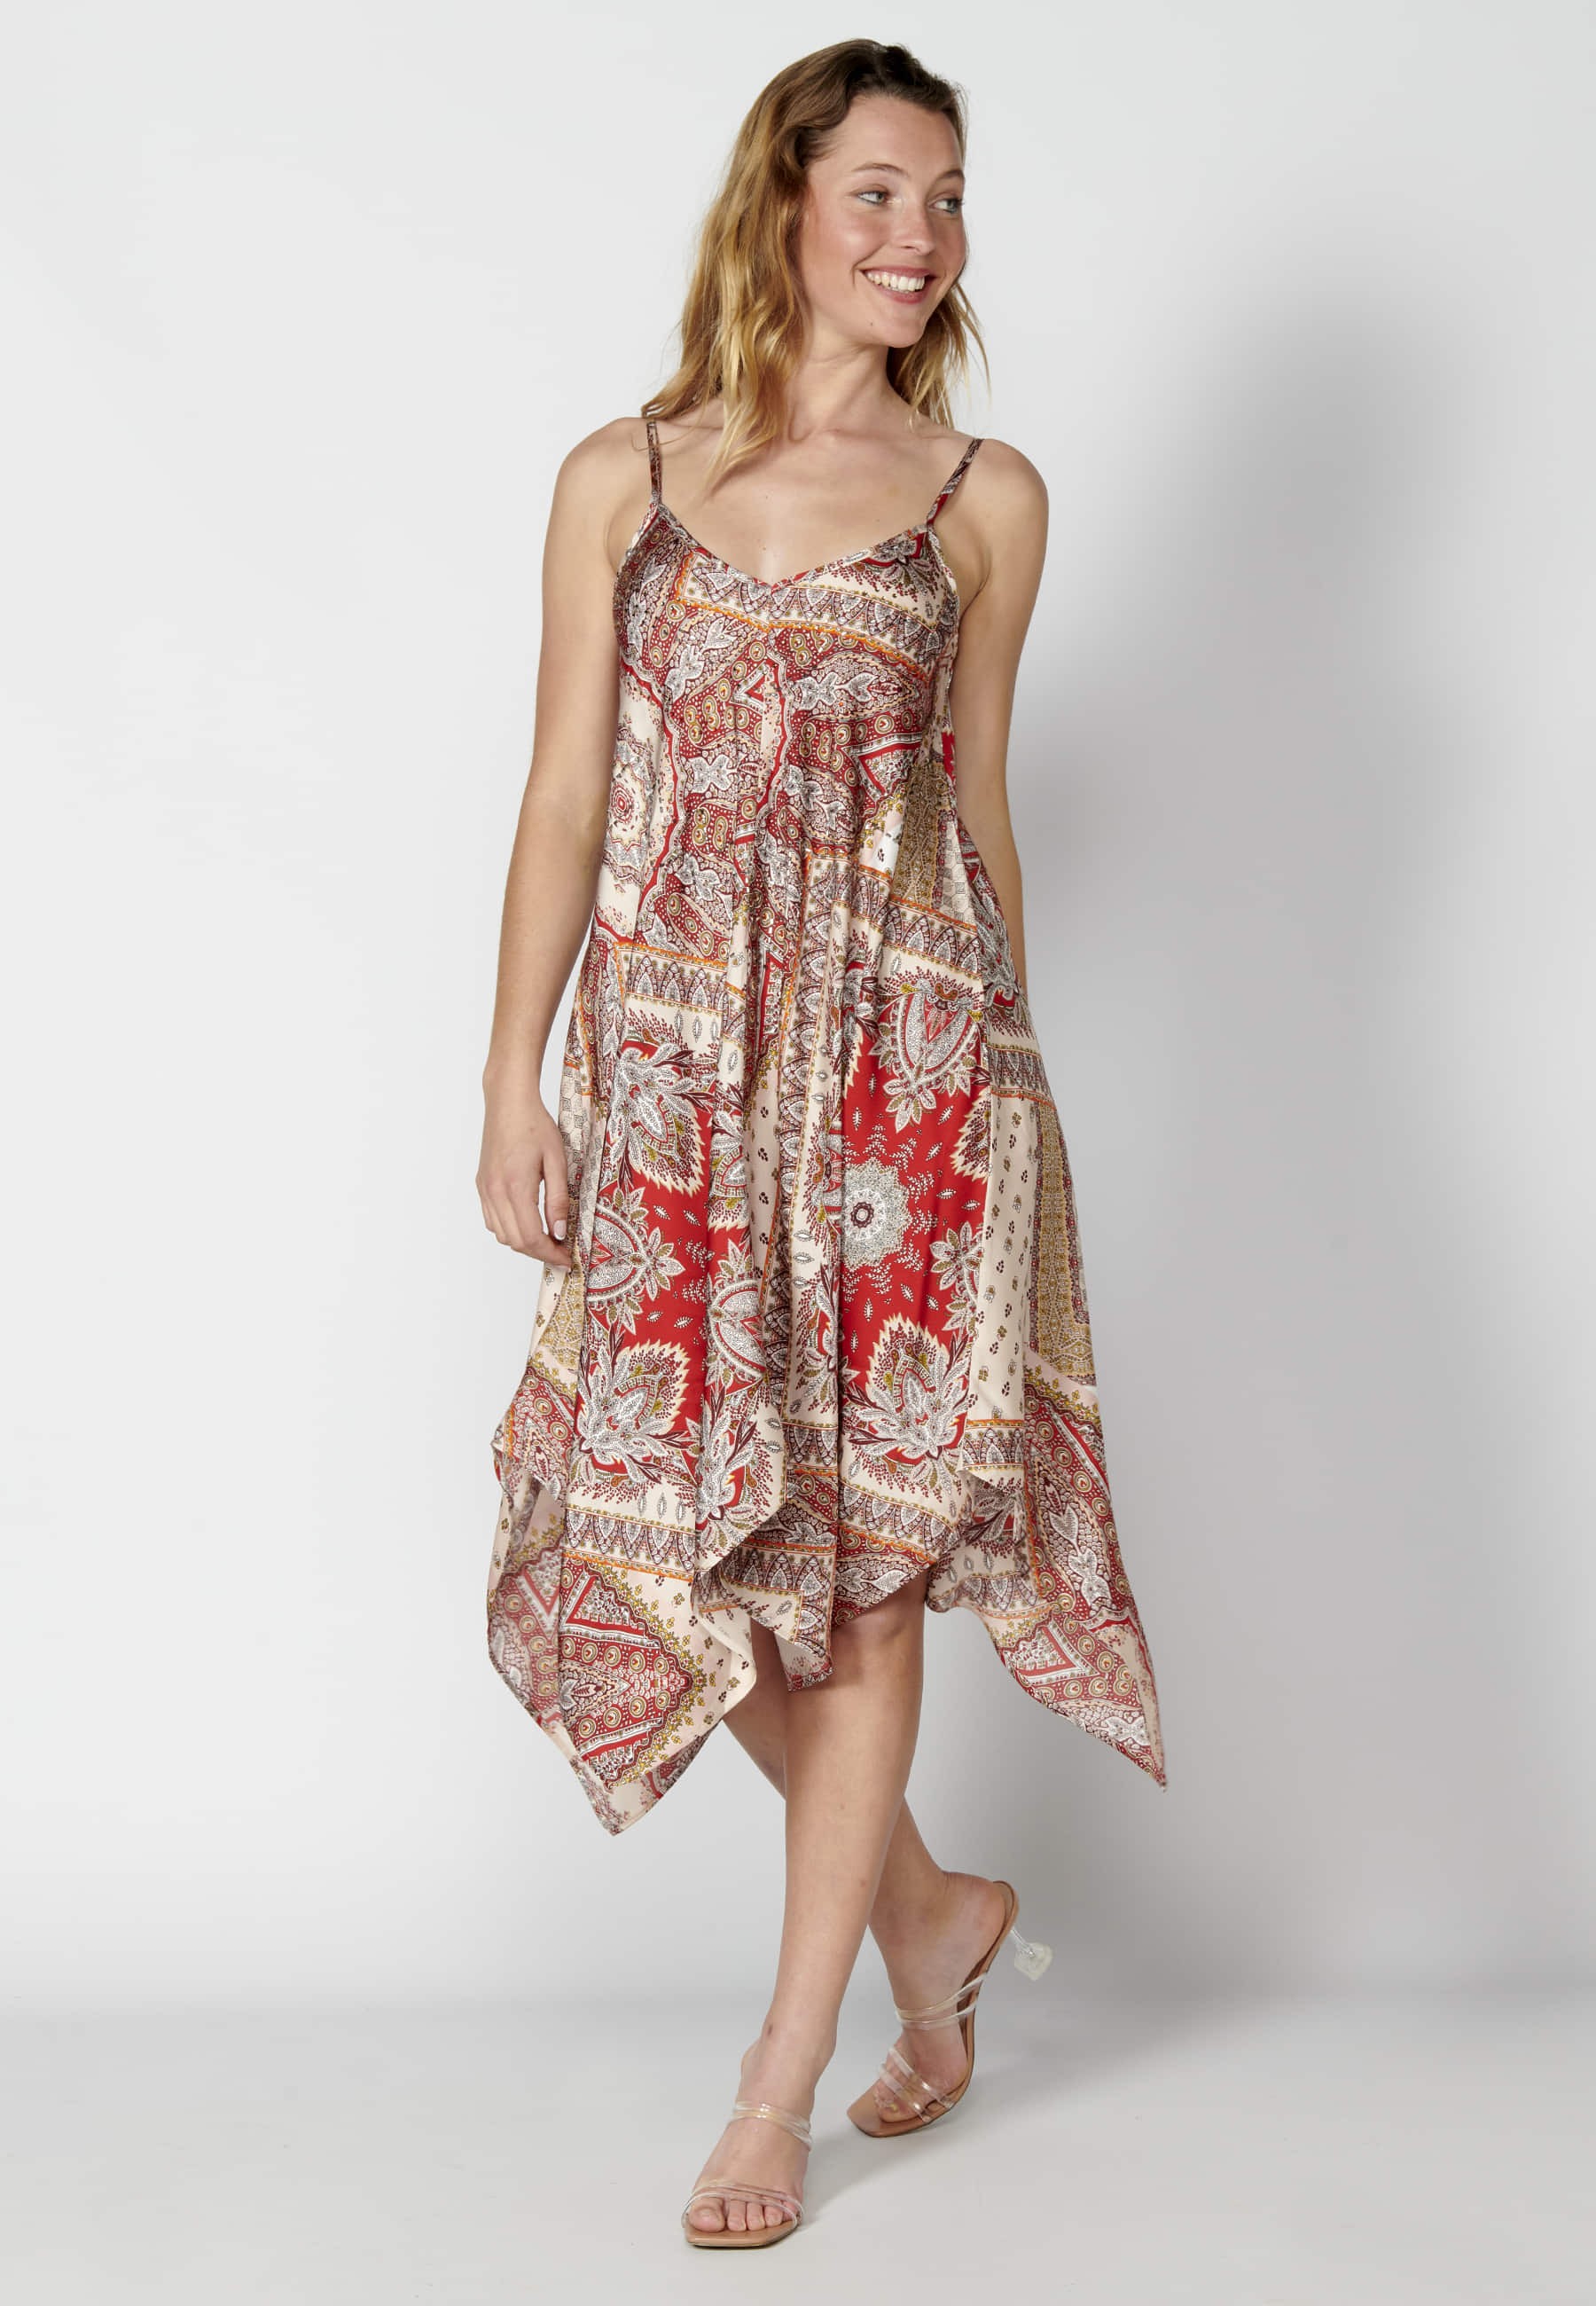 Loose long strappy dress with floral print in Red color for Women